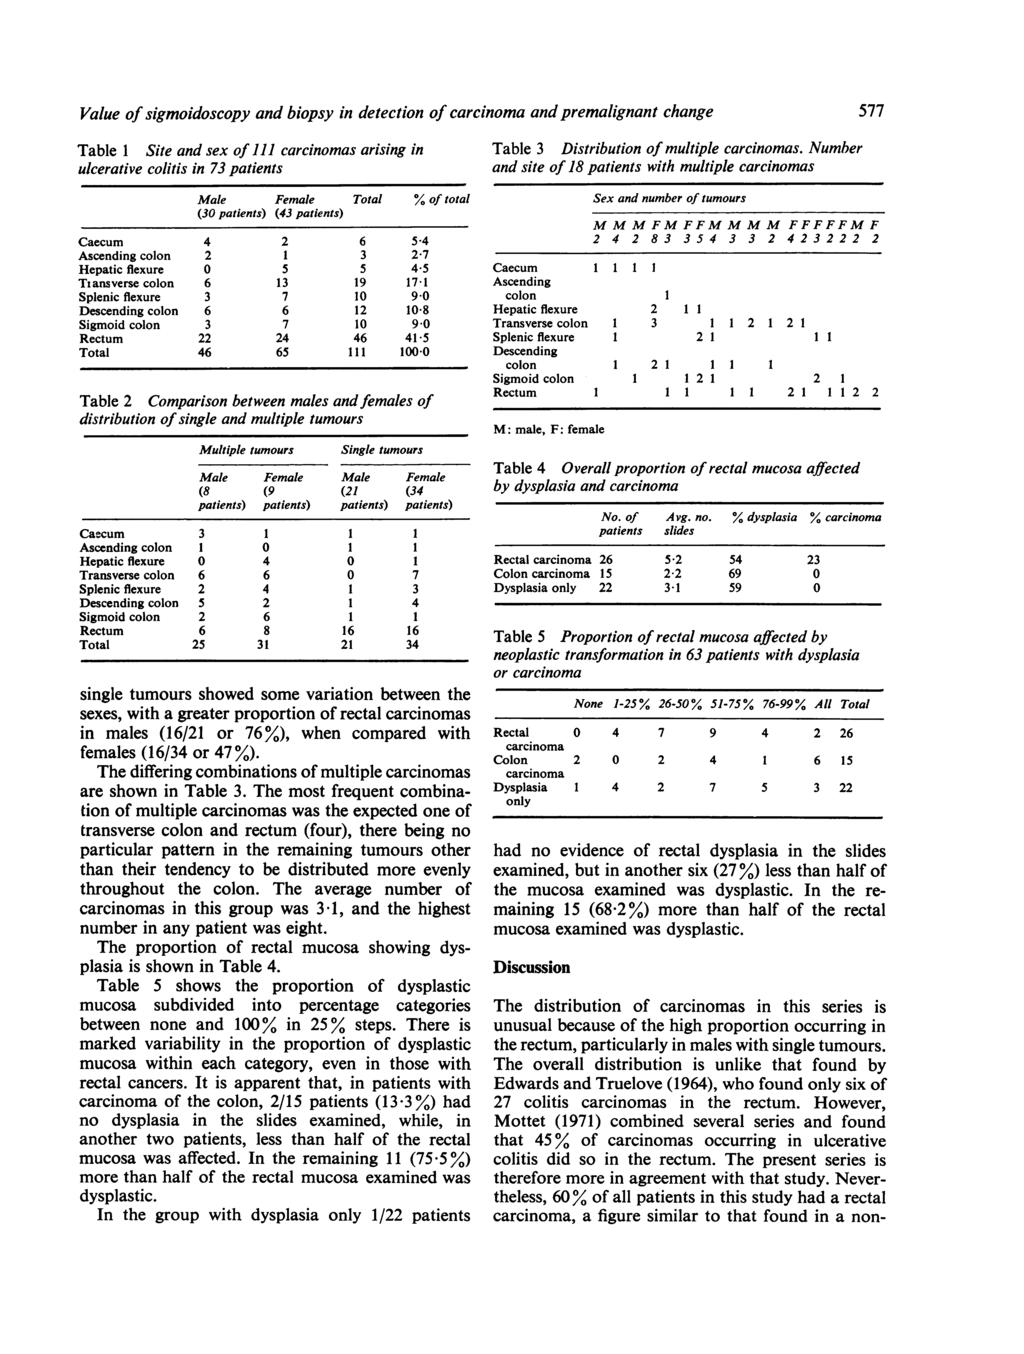 Value of sigmoidoscopy and biopsy in detection of carcinoma and premalignant change Table 1 Site and sex of 111 carcinomas arising in ulcerative colitis in 73 patients Male Female Total % of total